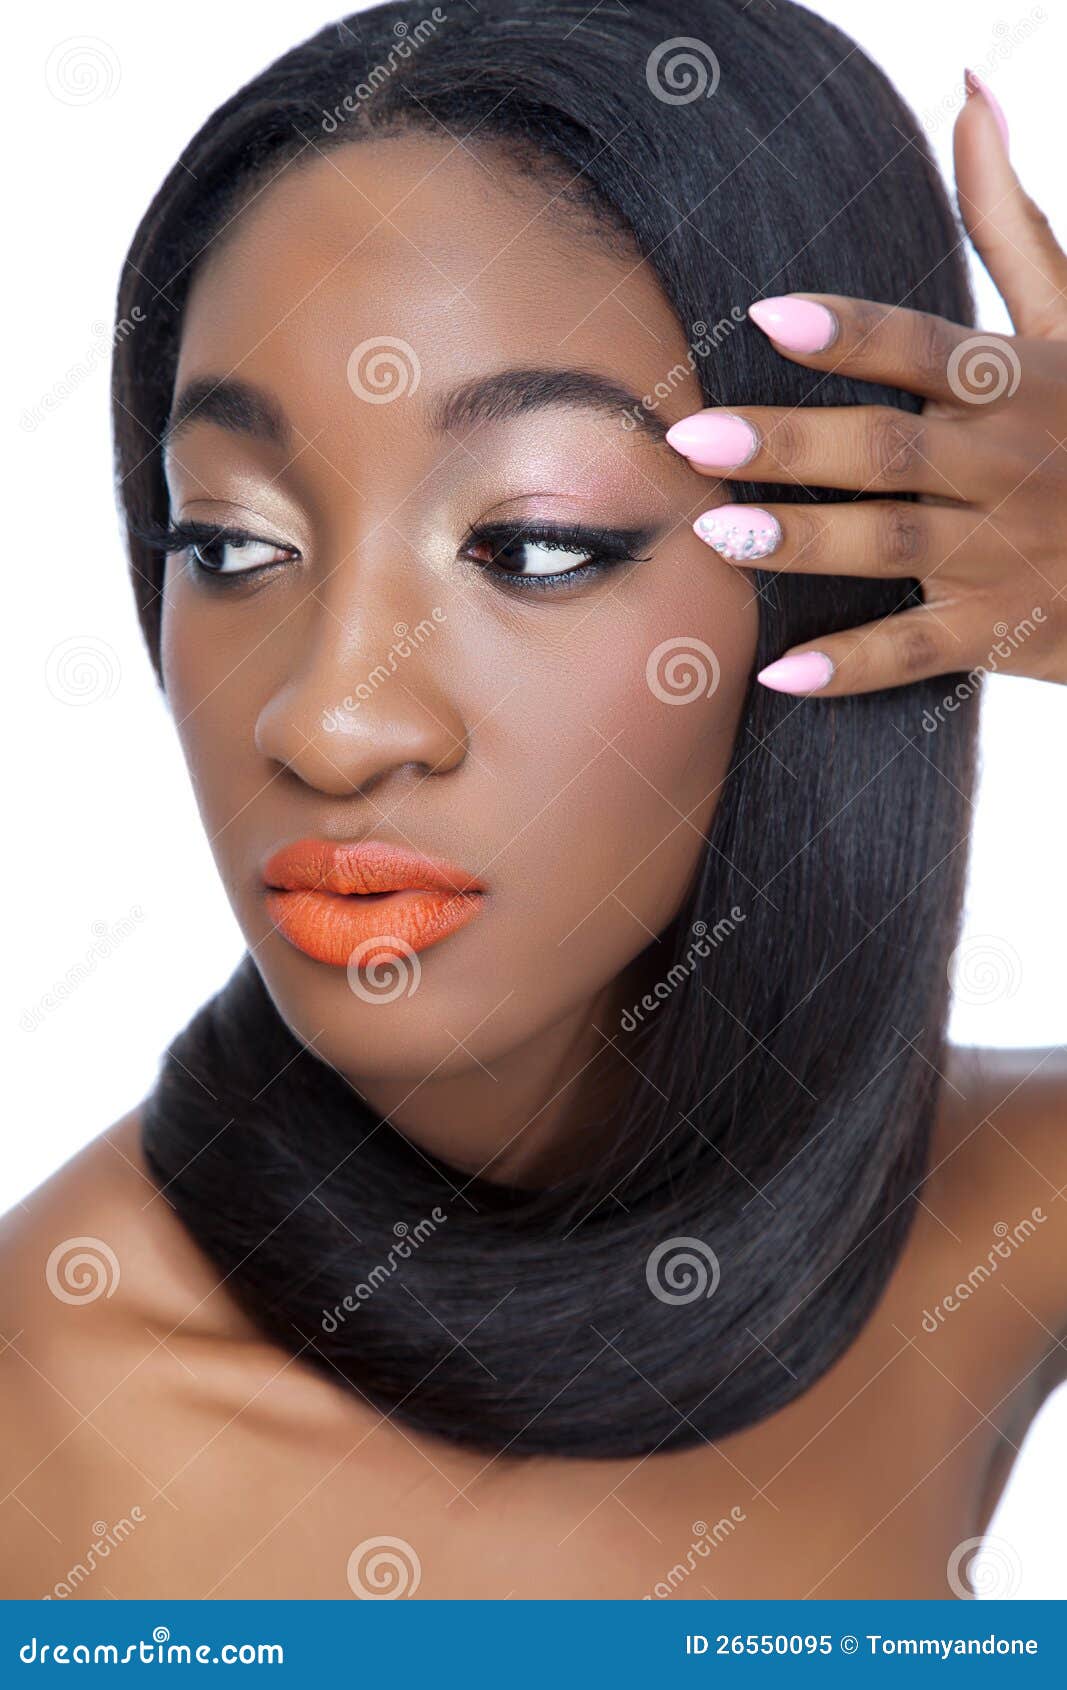 Beauty With Perfect Hair And Nails Stock Image Image Of Isolated